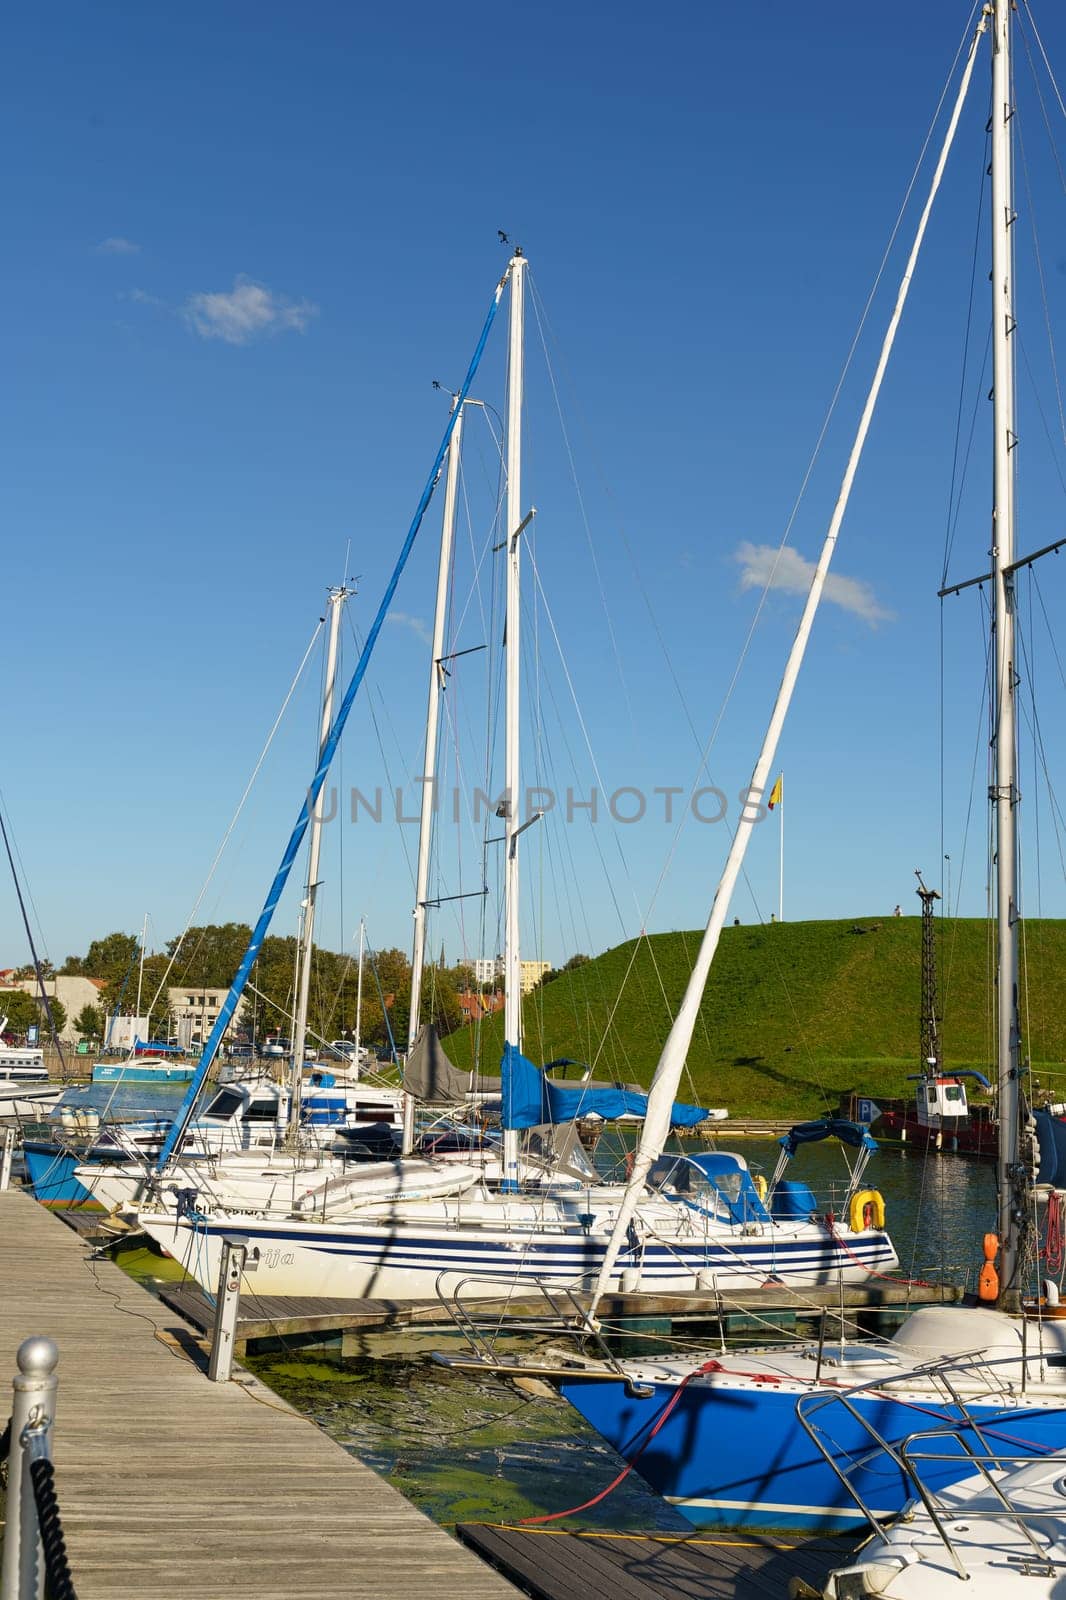 A group of sailboats are secured to a pier by Sd28DimoN_1976